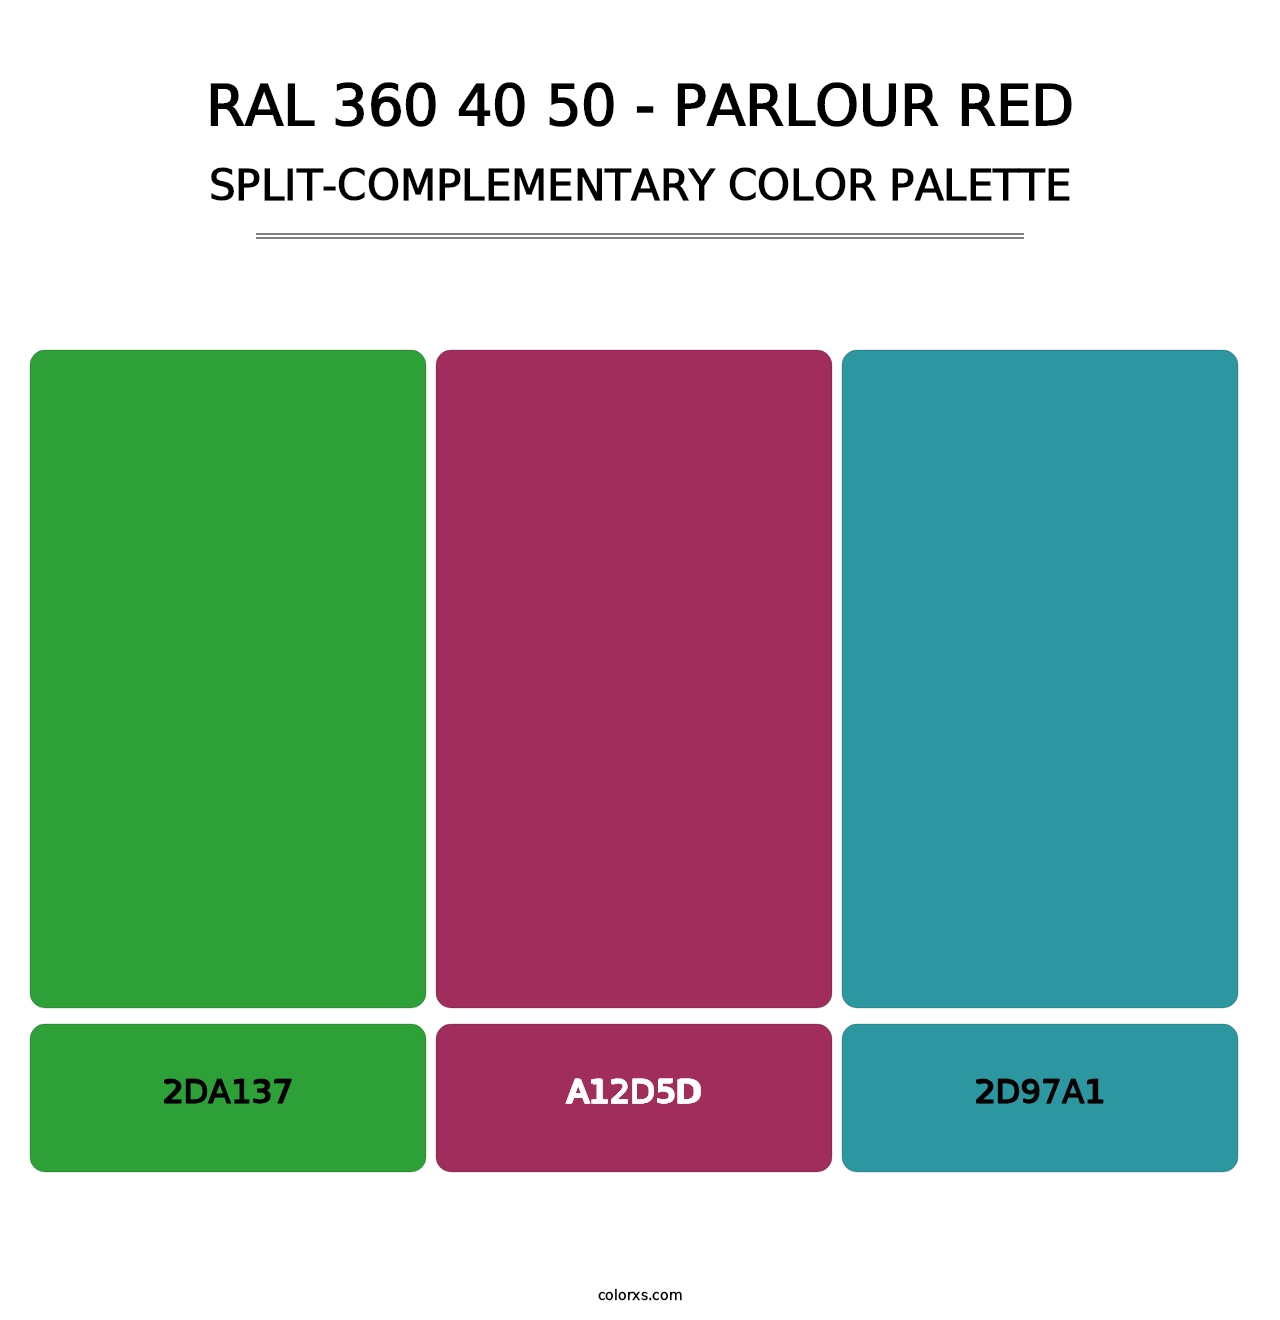 RAL 360 40 50 - Parlour Red - Split-Complementary Color Palette